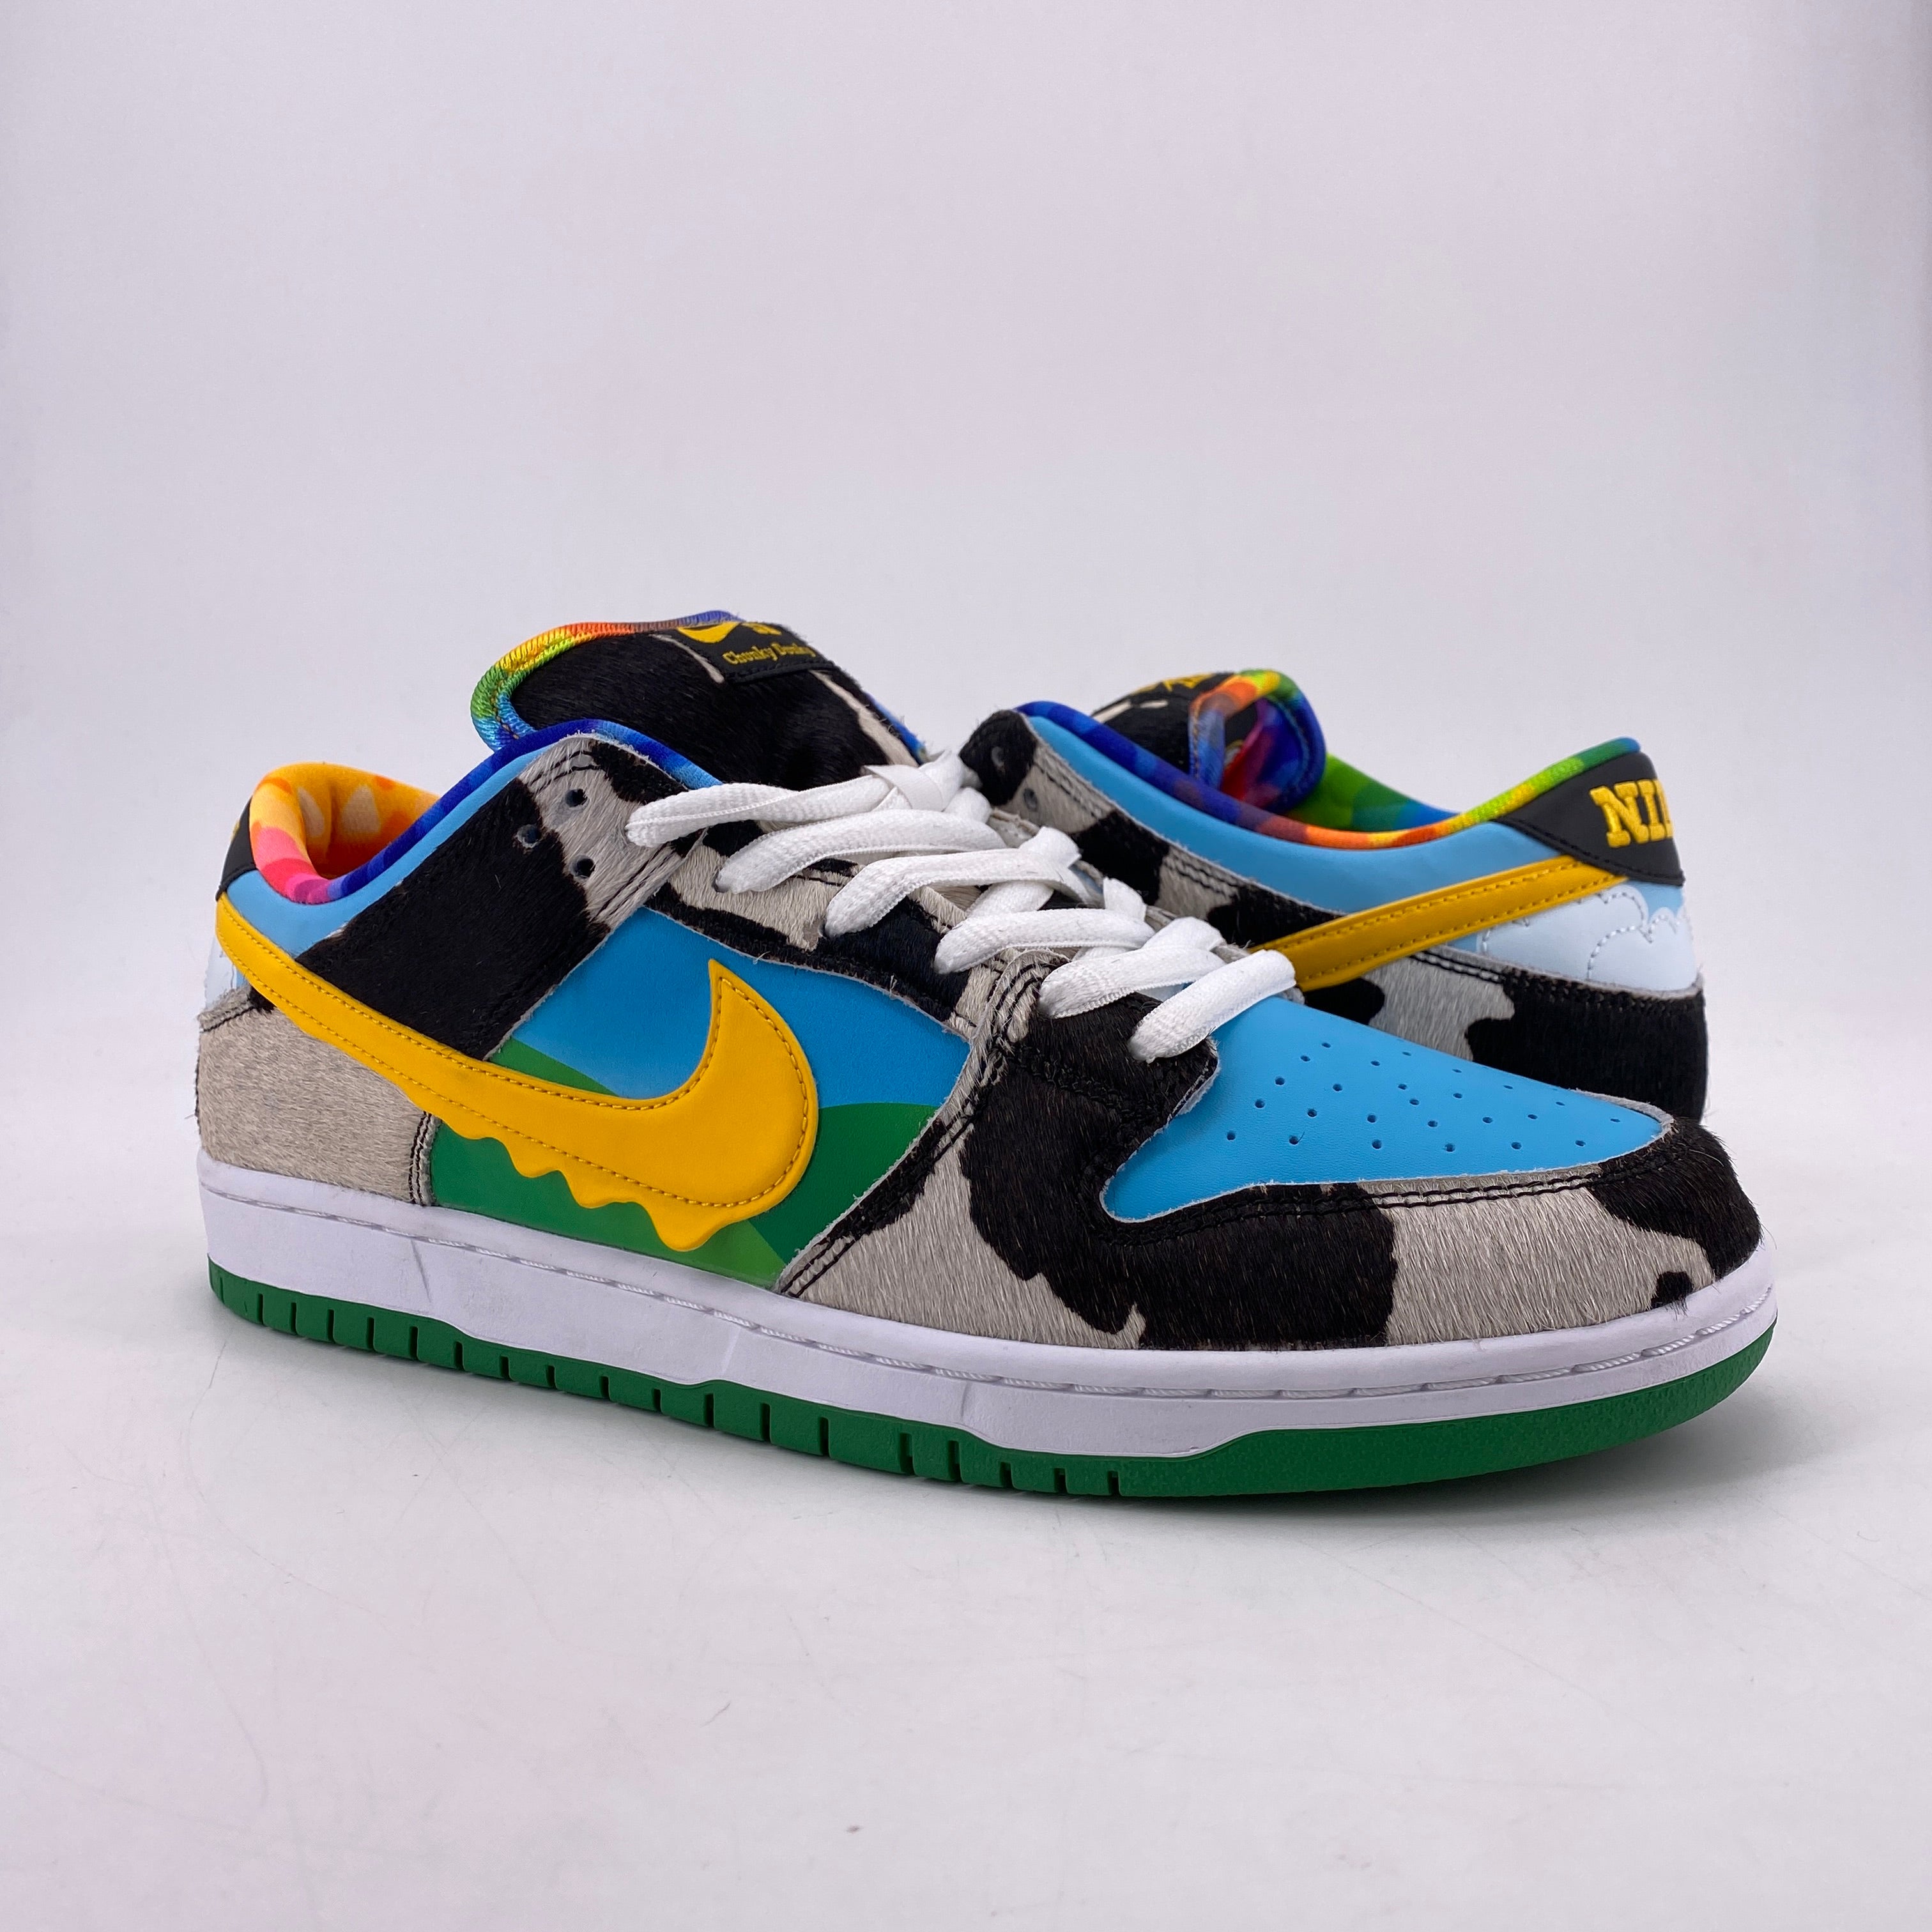 Nike SB Dunk Low "Chunky Dunky" 2020 New Size 11